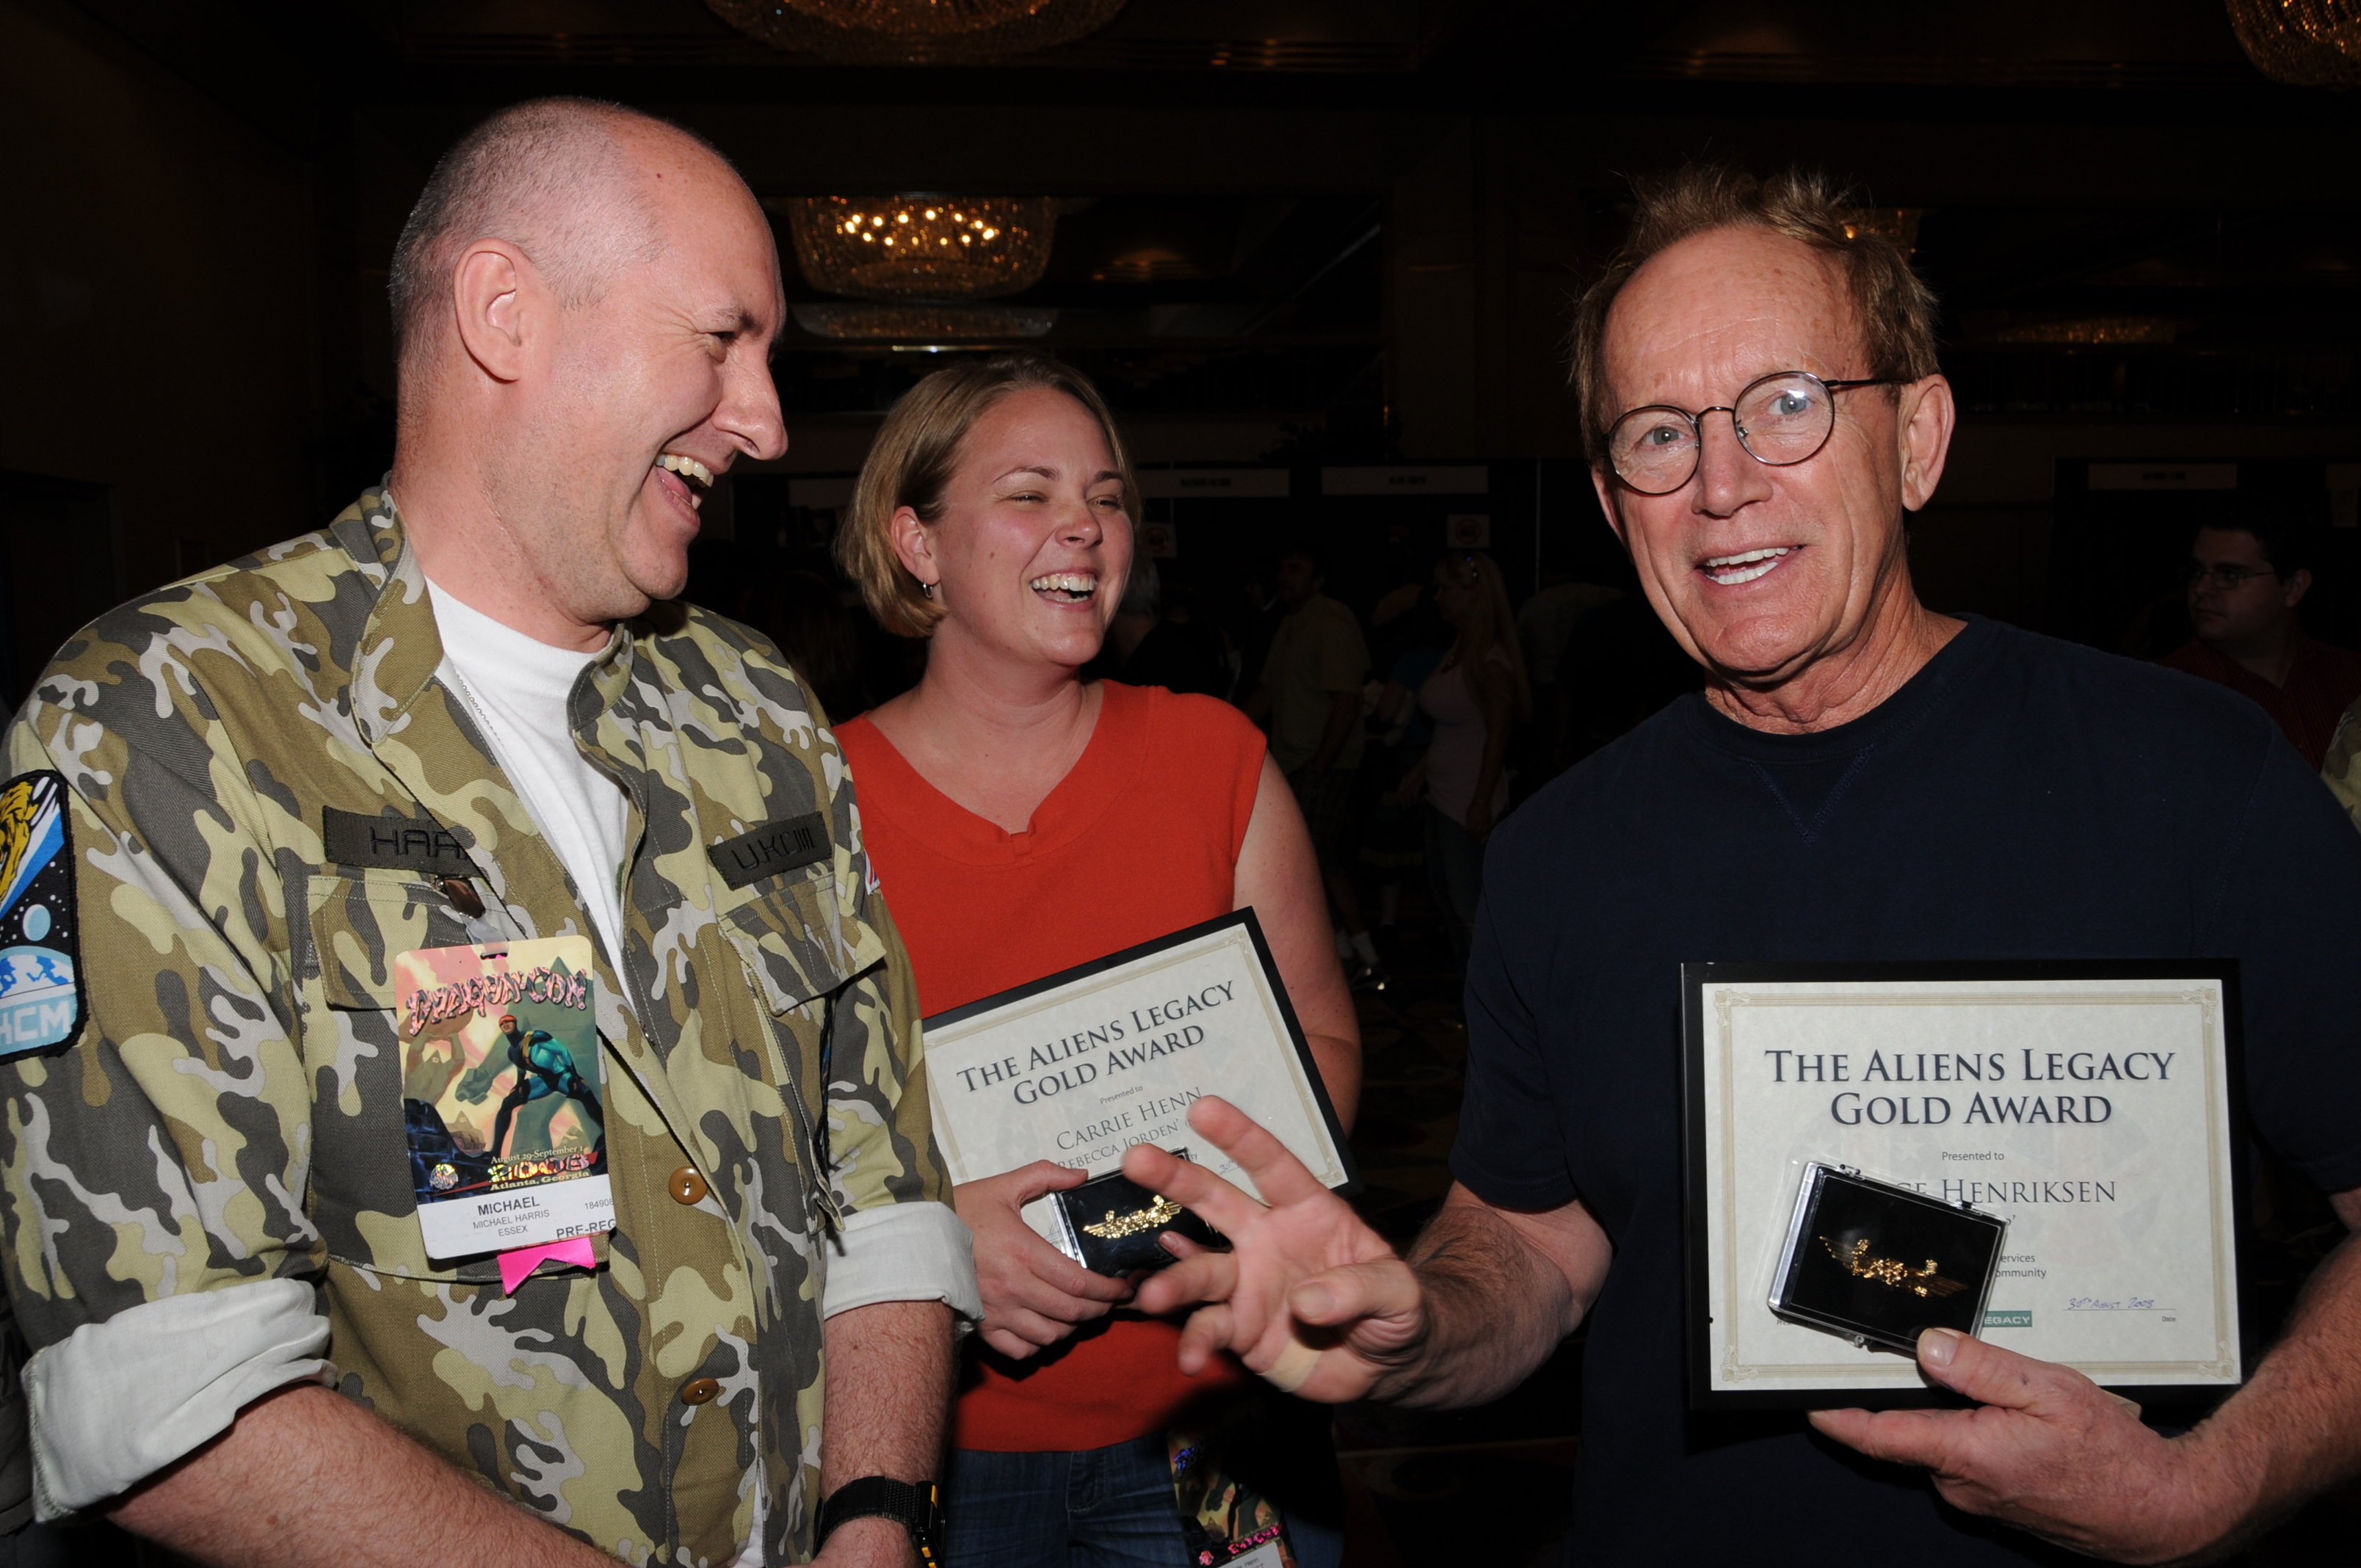 Producer Harry Harris (left) presents Lance Henriksen and Carrie Kutcher with their Aliens Legacy Gold Awards on behalf of Aliens fans worldwide